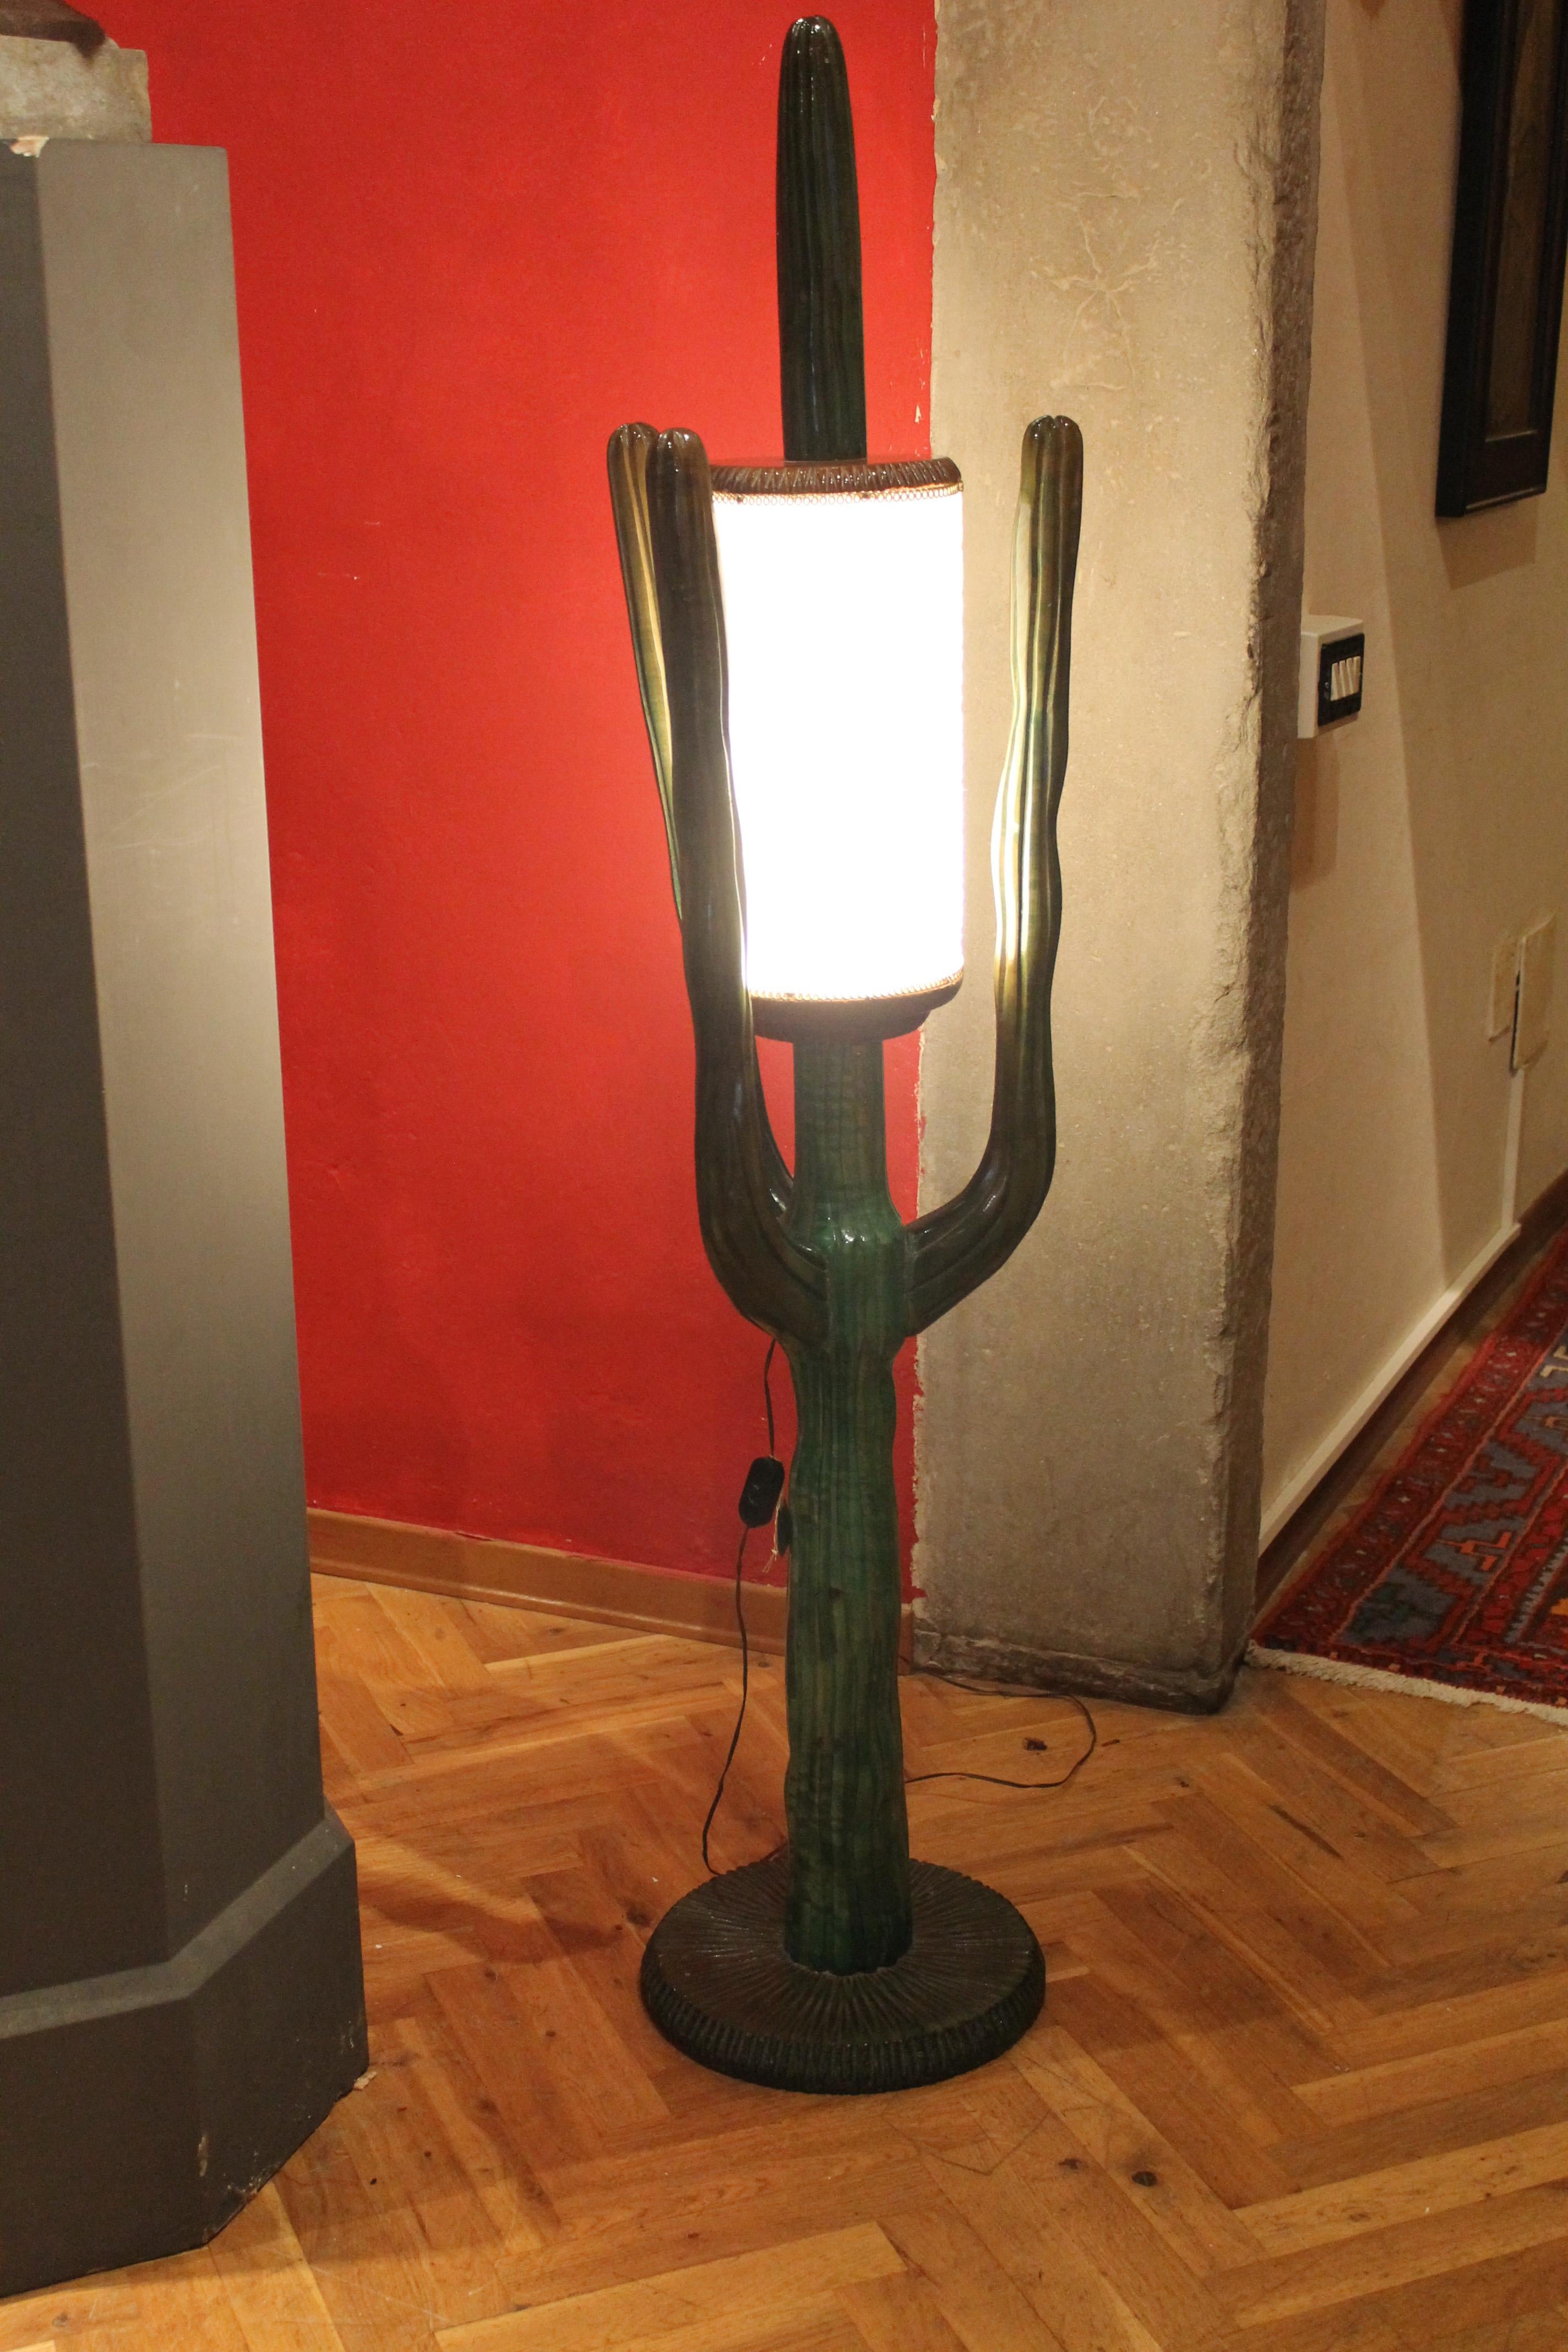 This fun and unusual one light 20th century Italian design floor lamp is made of solid wood and plastic. The wood shape of the cactus is well carved and green lacquered, the light is housed in a white plastic cylinder-shaped case with two wooden